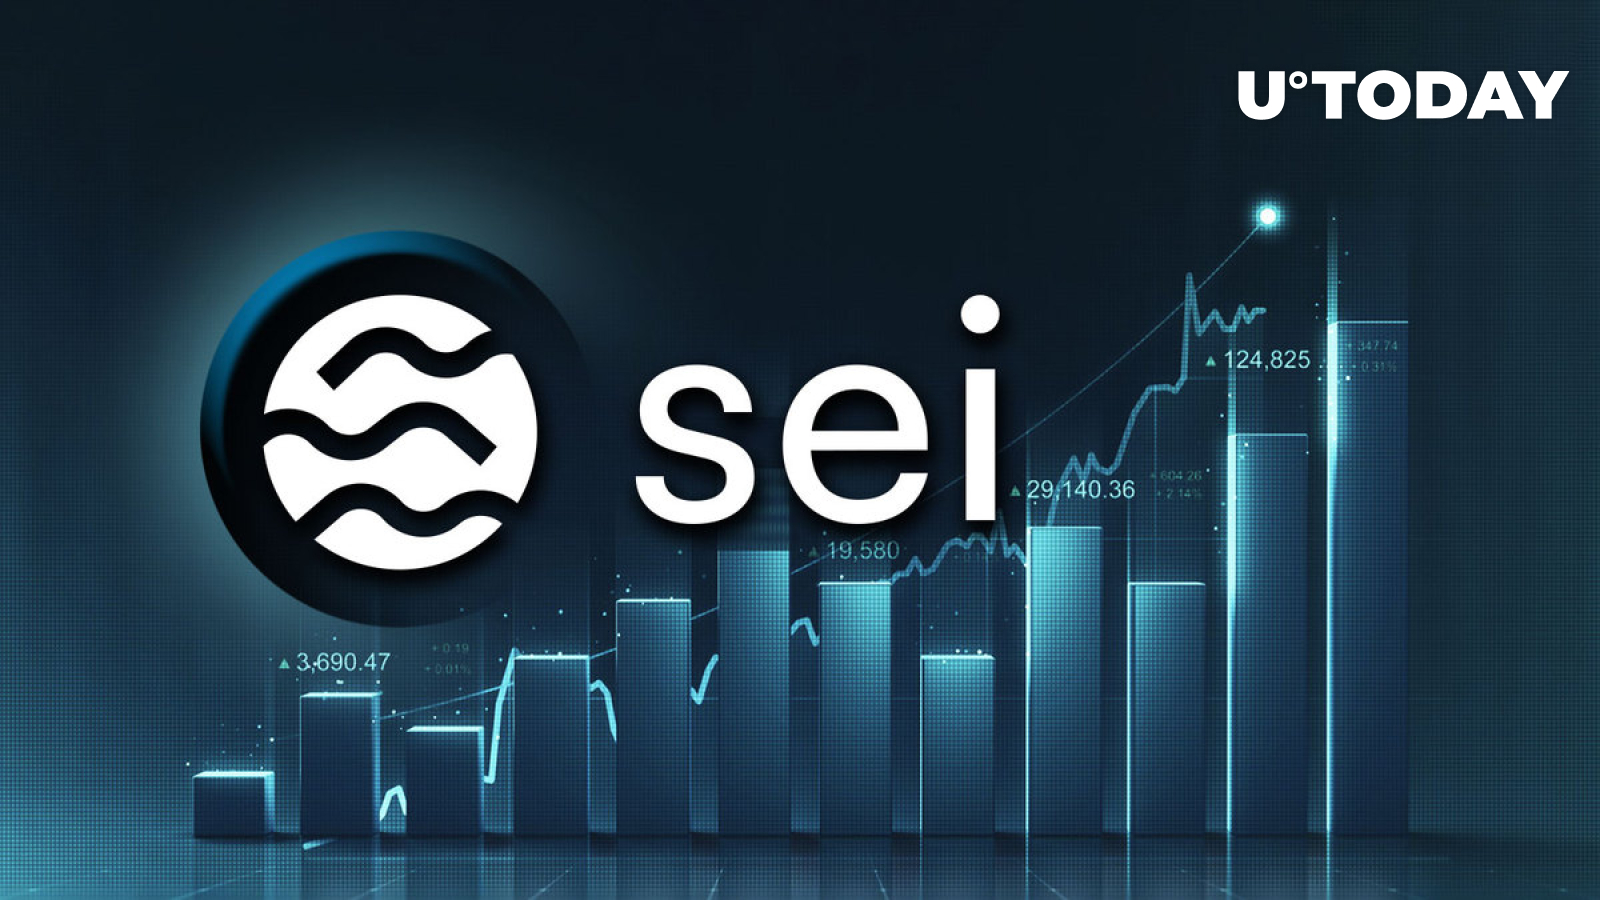 SEI Records Jaw-Dropping 35% Surge, Where Is Price Heading?